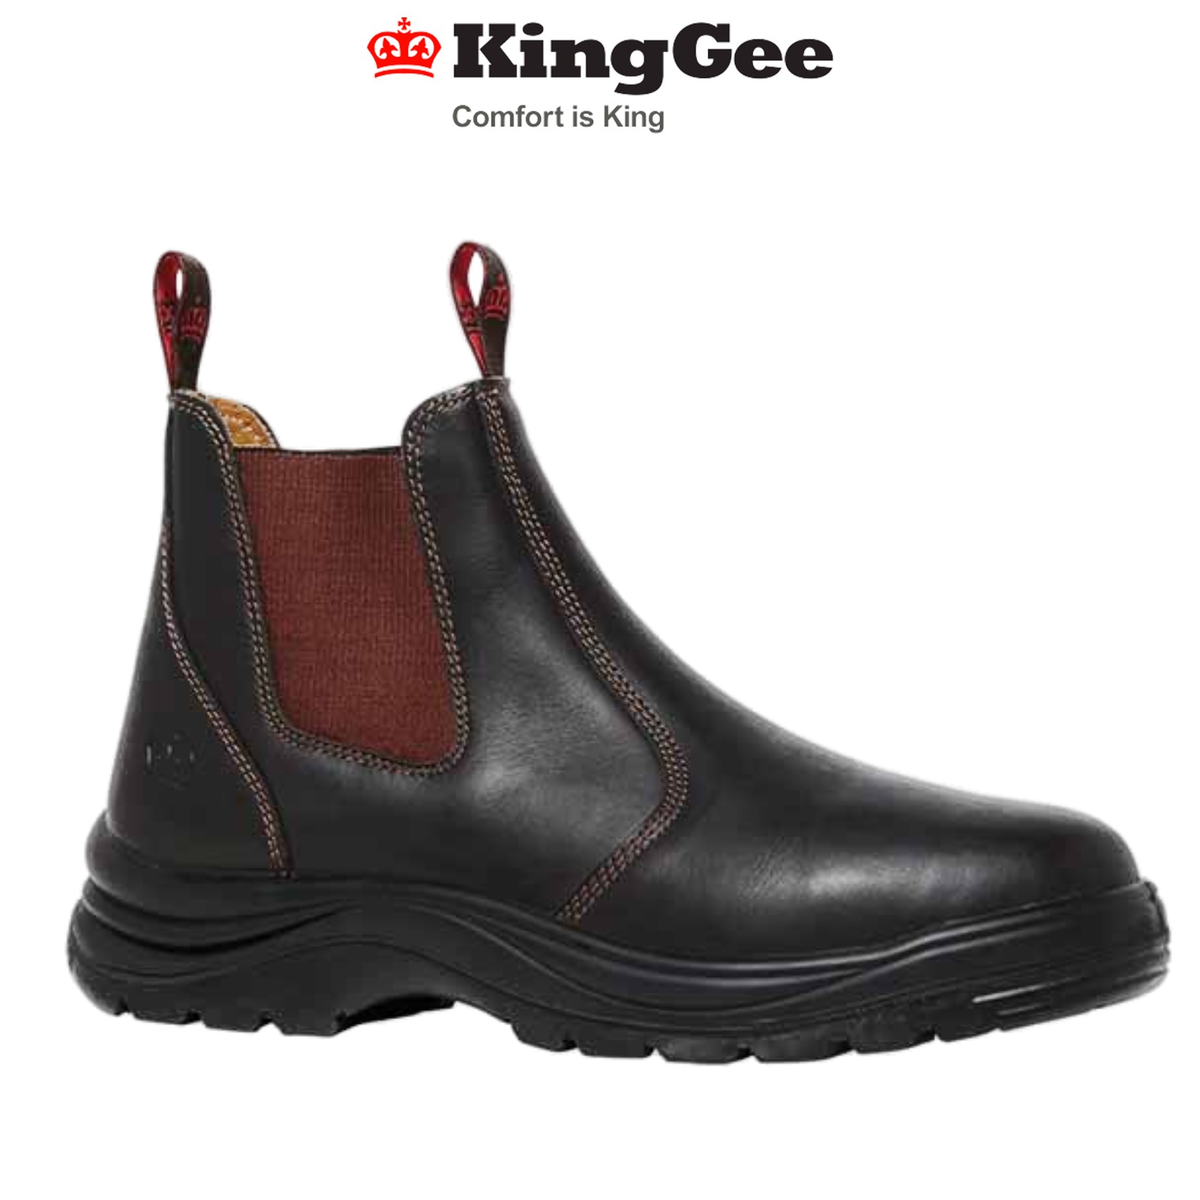 KingGee Mens Station NS Water Resistant Fashion Leather Comfy Work Boots K22650